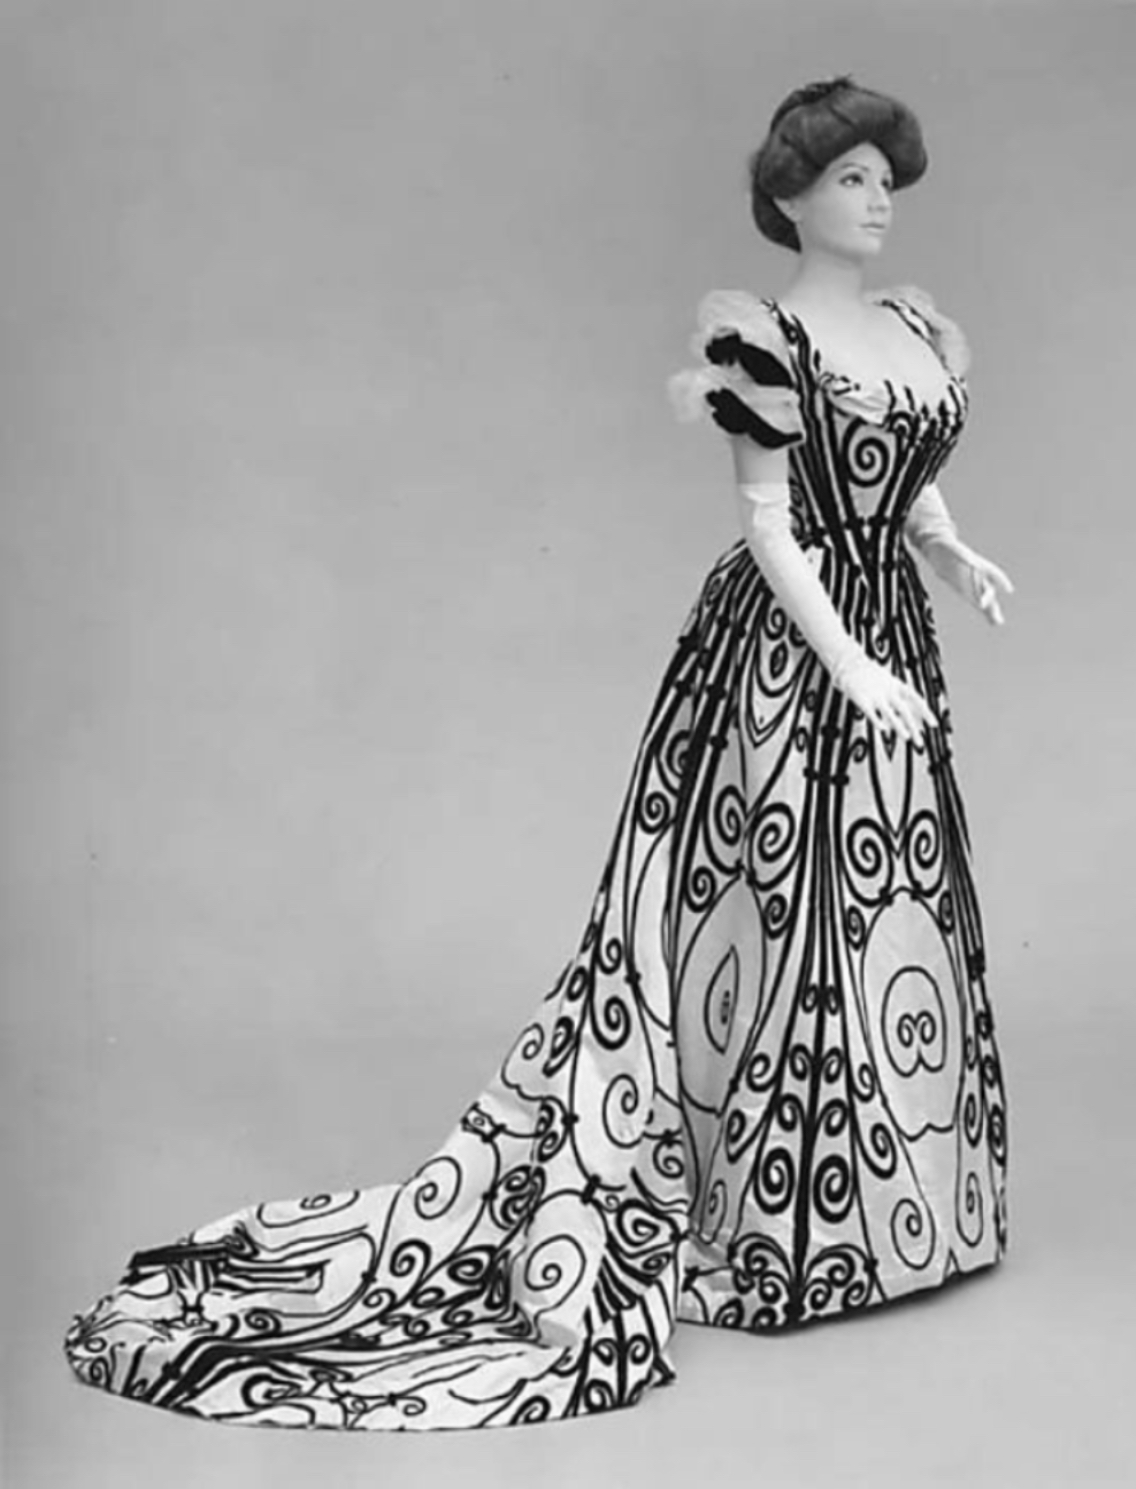 Teagown. From 1900 women wore a less formal dress at home, also called a  teagown. The model on display here is called a robe princesse and follows  the curves of the body